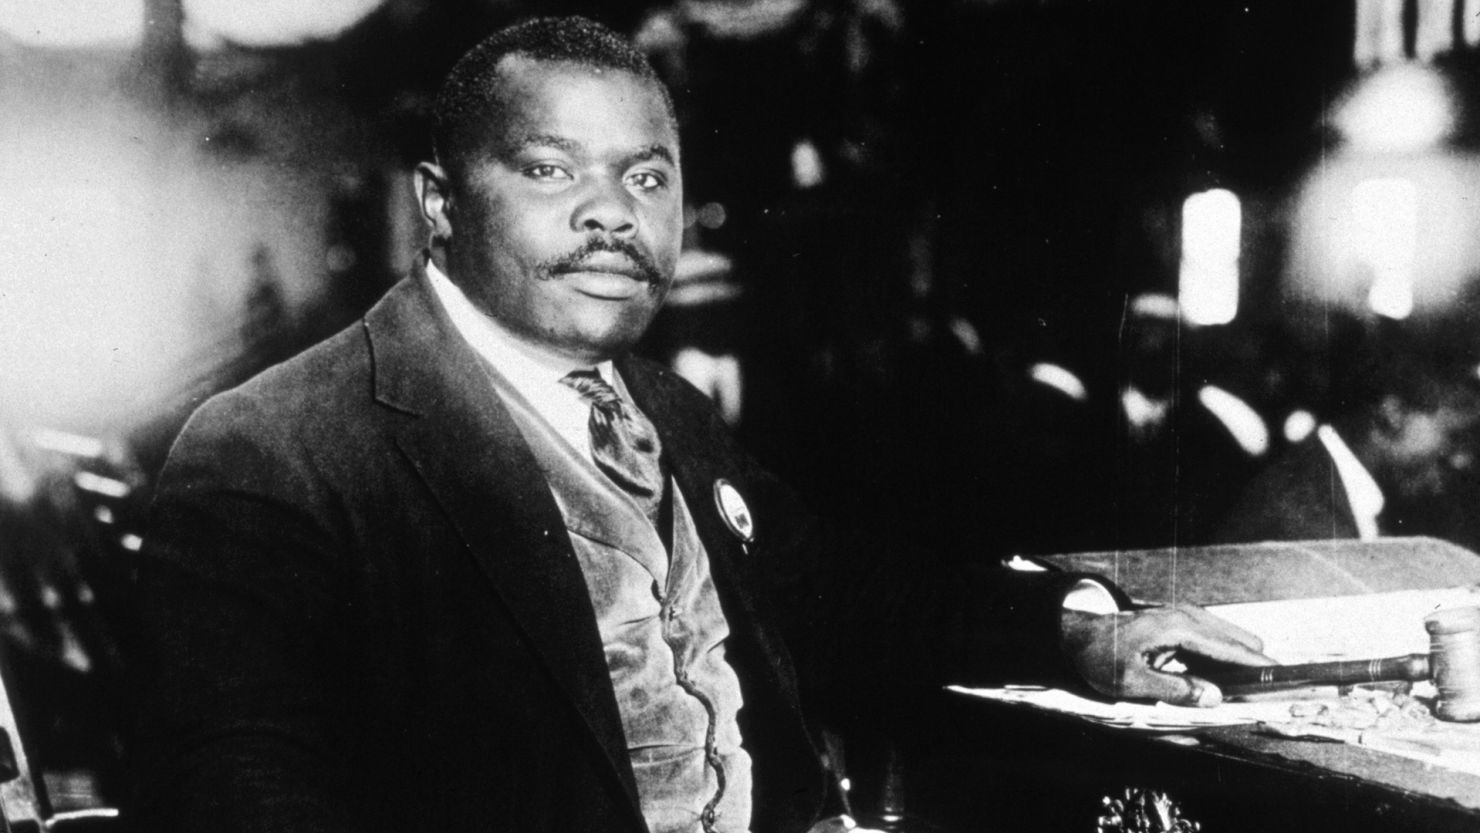 Jamaican born African-American nationalist Marcus Garvey, the founder of the Universal Negro Improvment Association (UNIA).